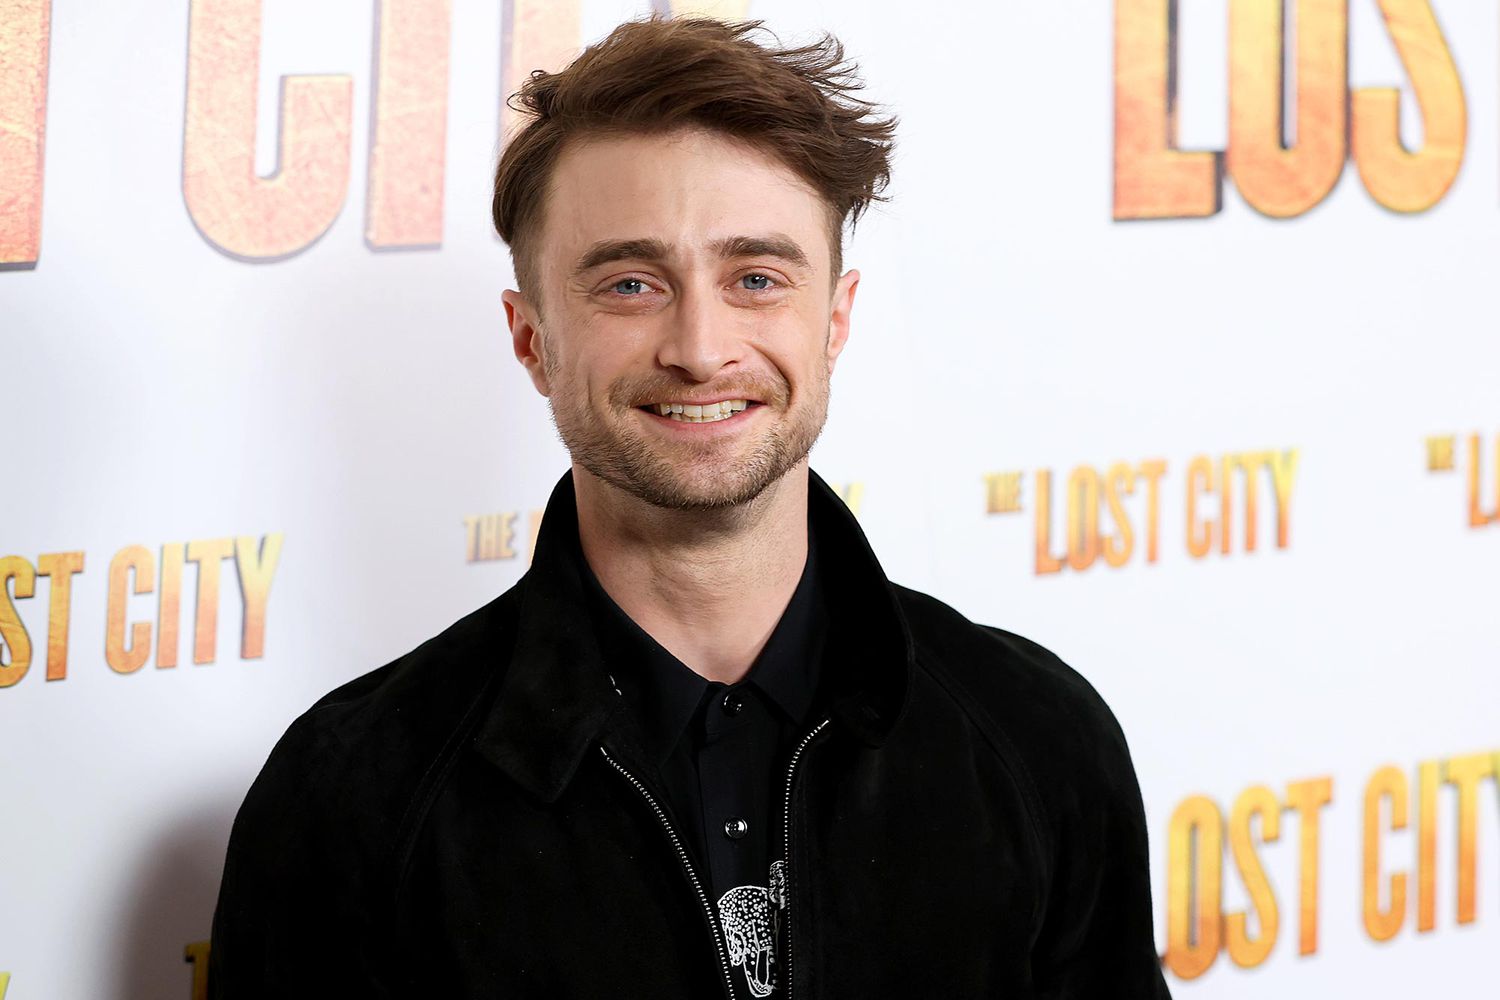 Daniel Radcliffe explains why he spoke out against J.K. Rowling's comments on trans people